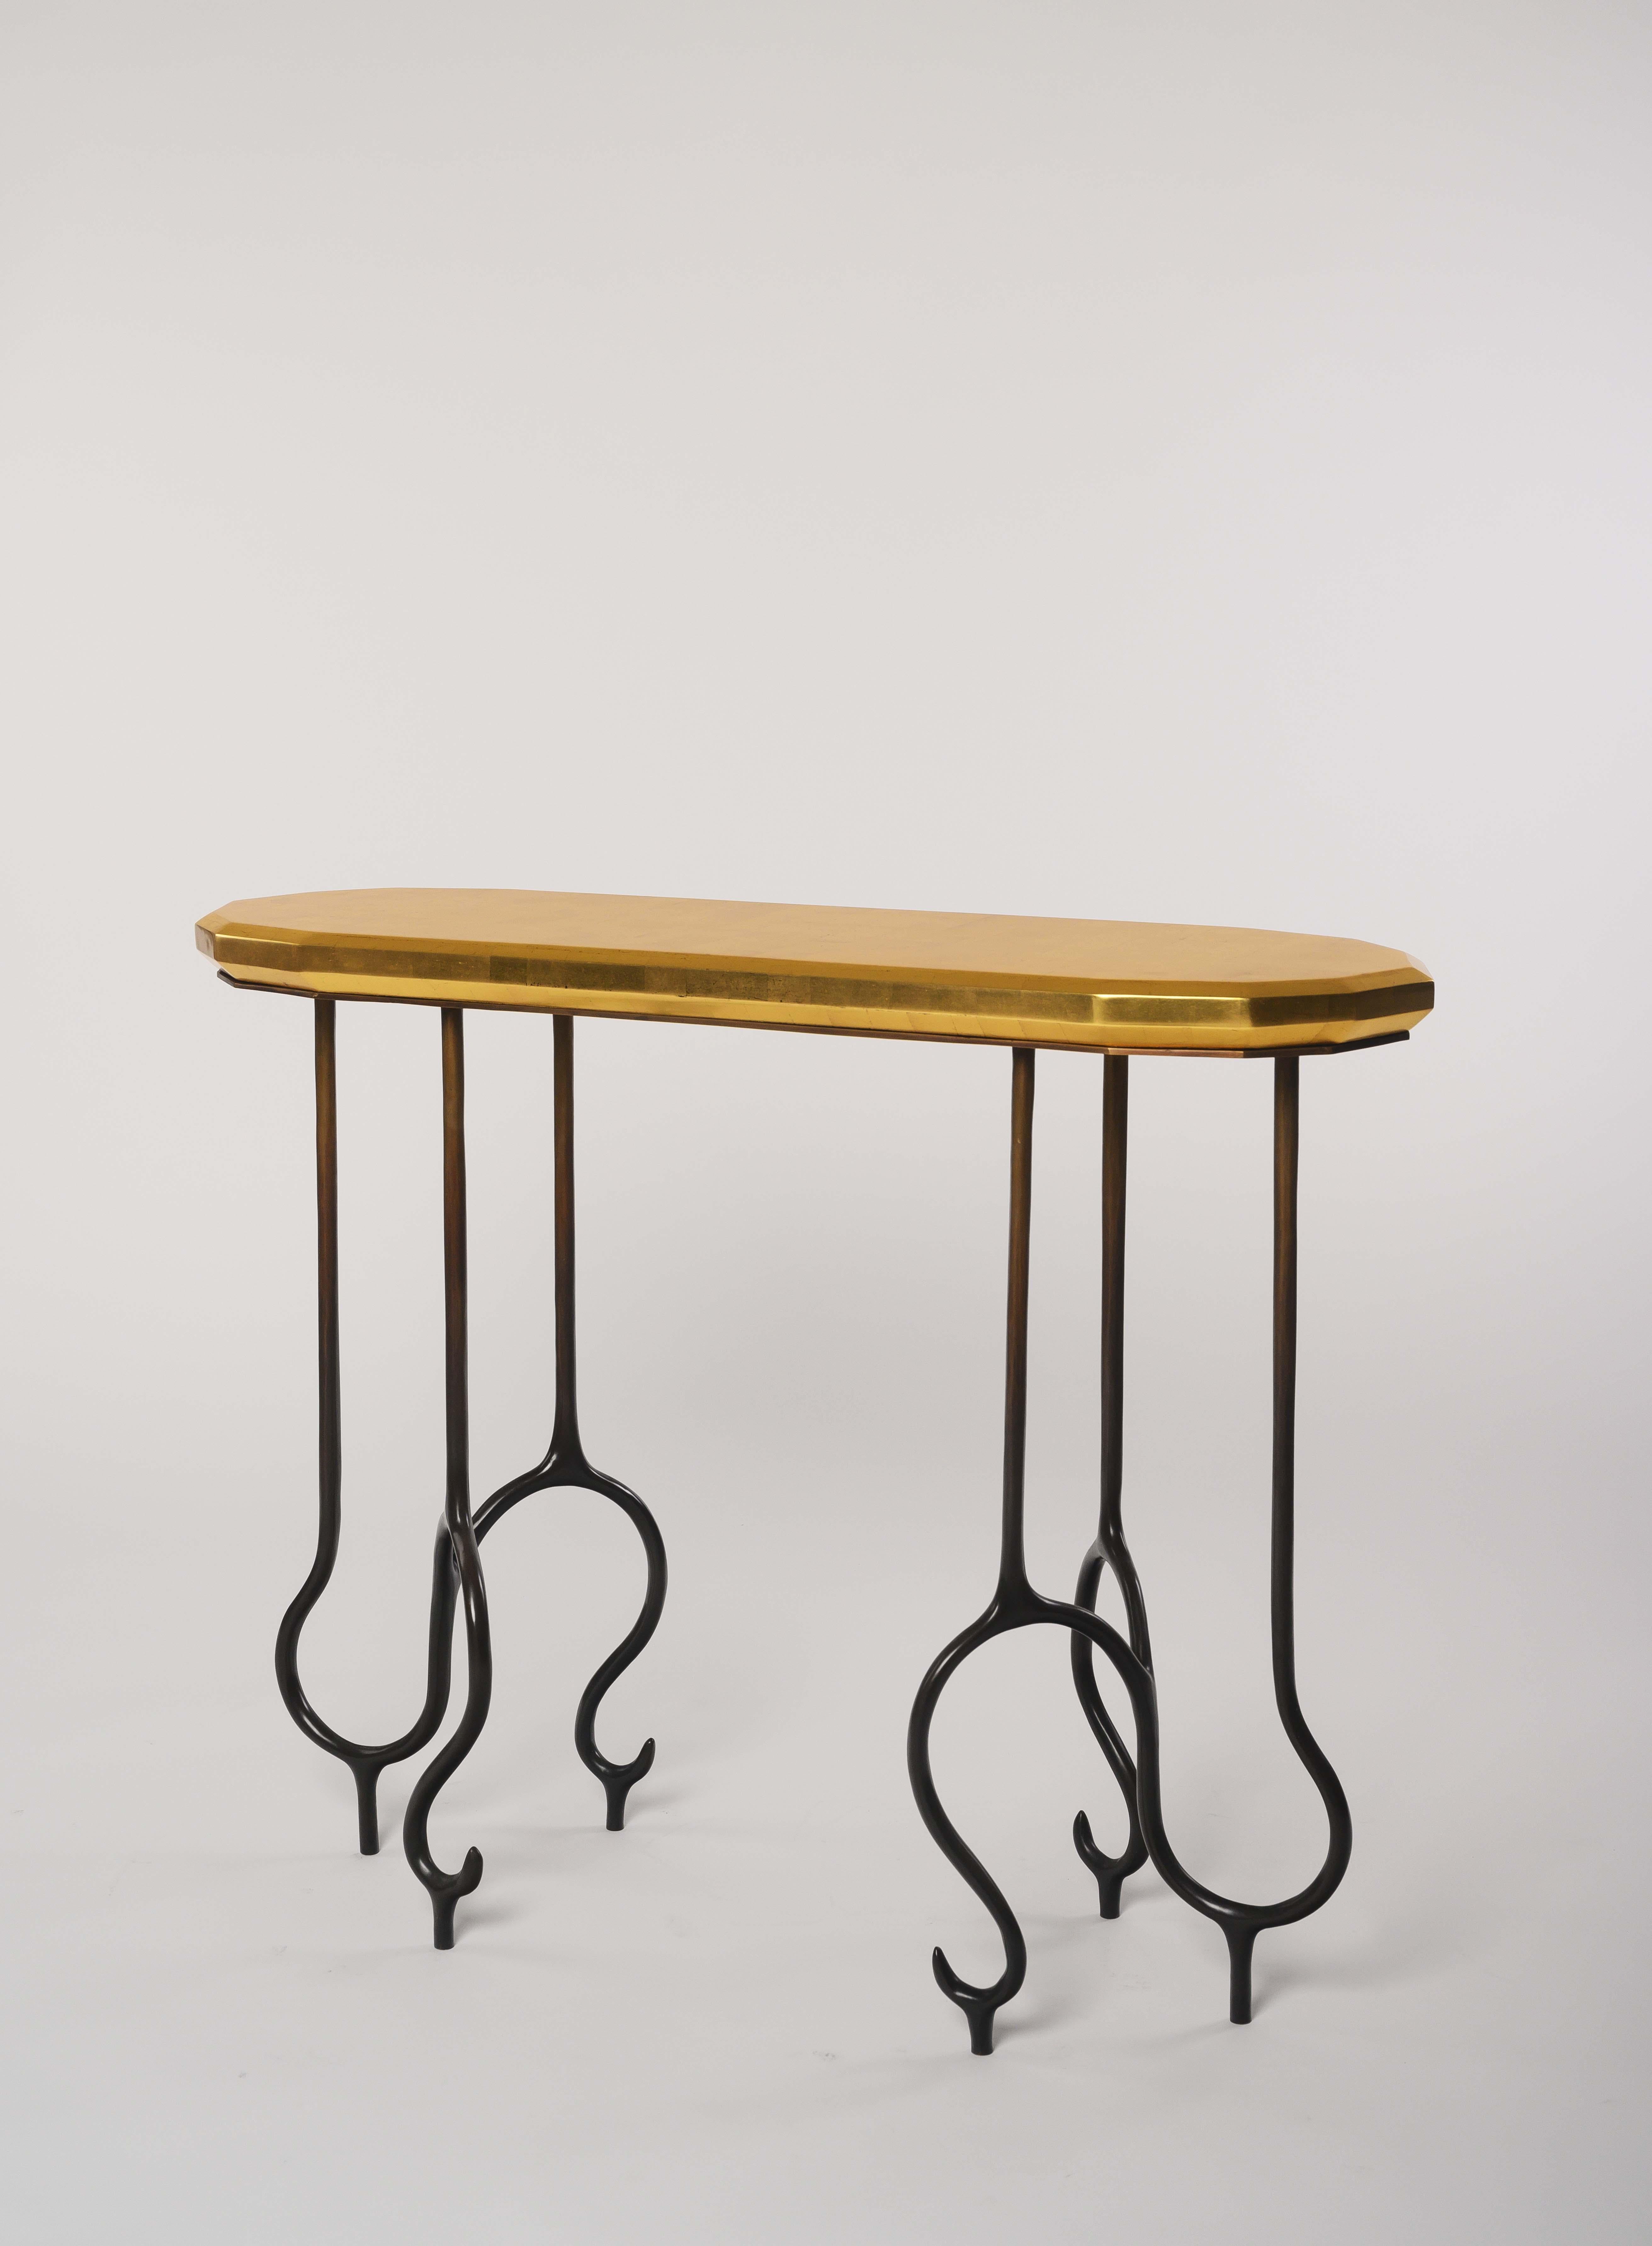 Faroh Console in Cast Bronze and Gold Leaf by Elan Atelier

The Faroh console is a combination of distinctive cast bronze legs topped by a stunning solid wood gilt top. Custom sizes and finishes are available.

Dimensions/
w 39.4 x d 11.8 x h 30.5